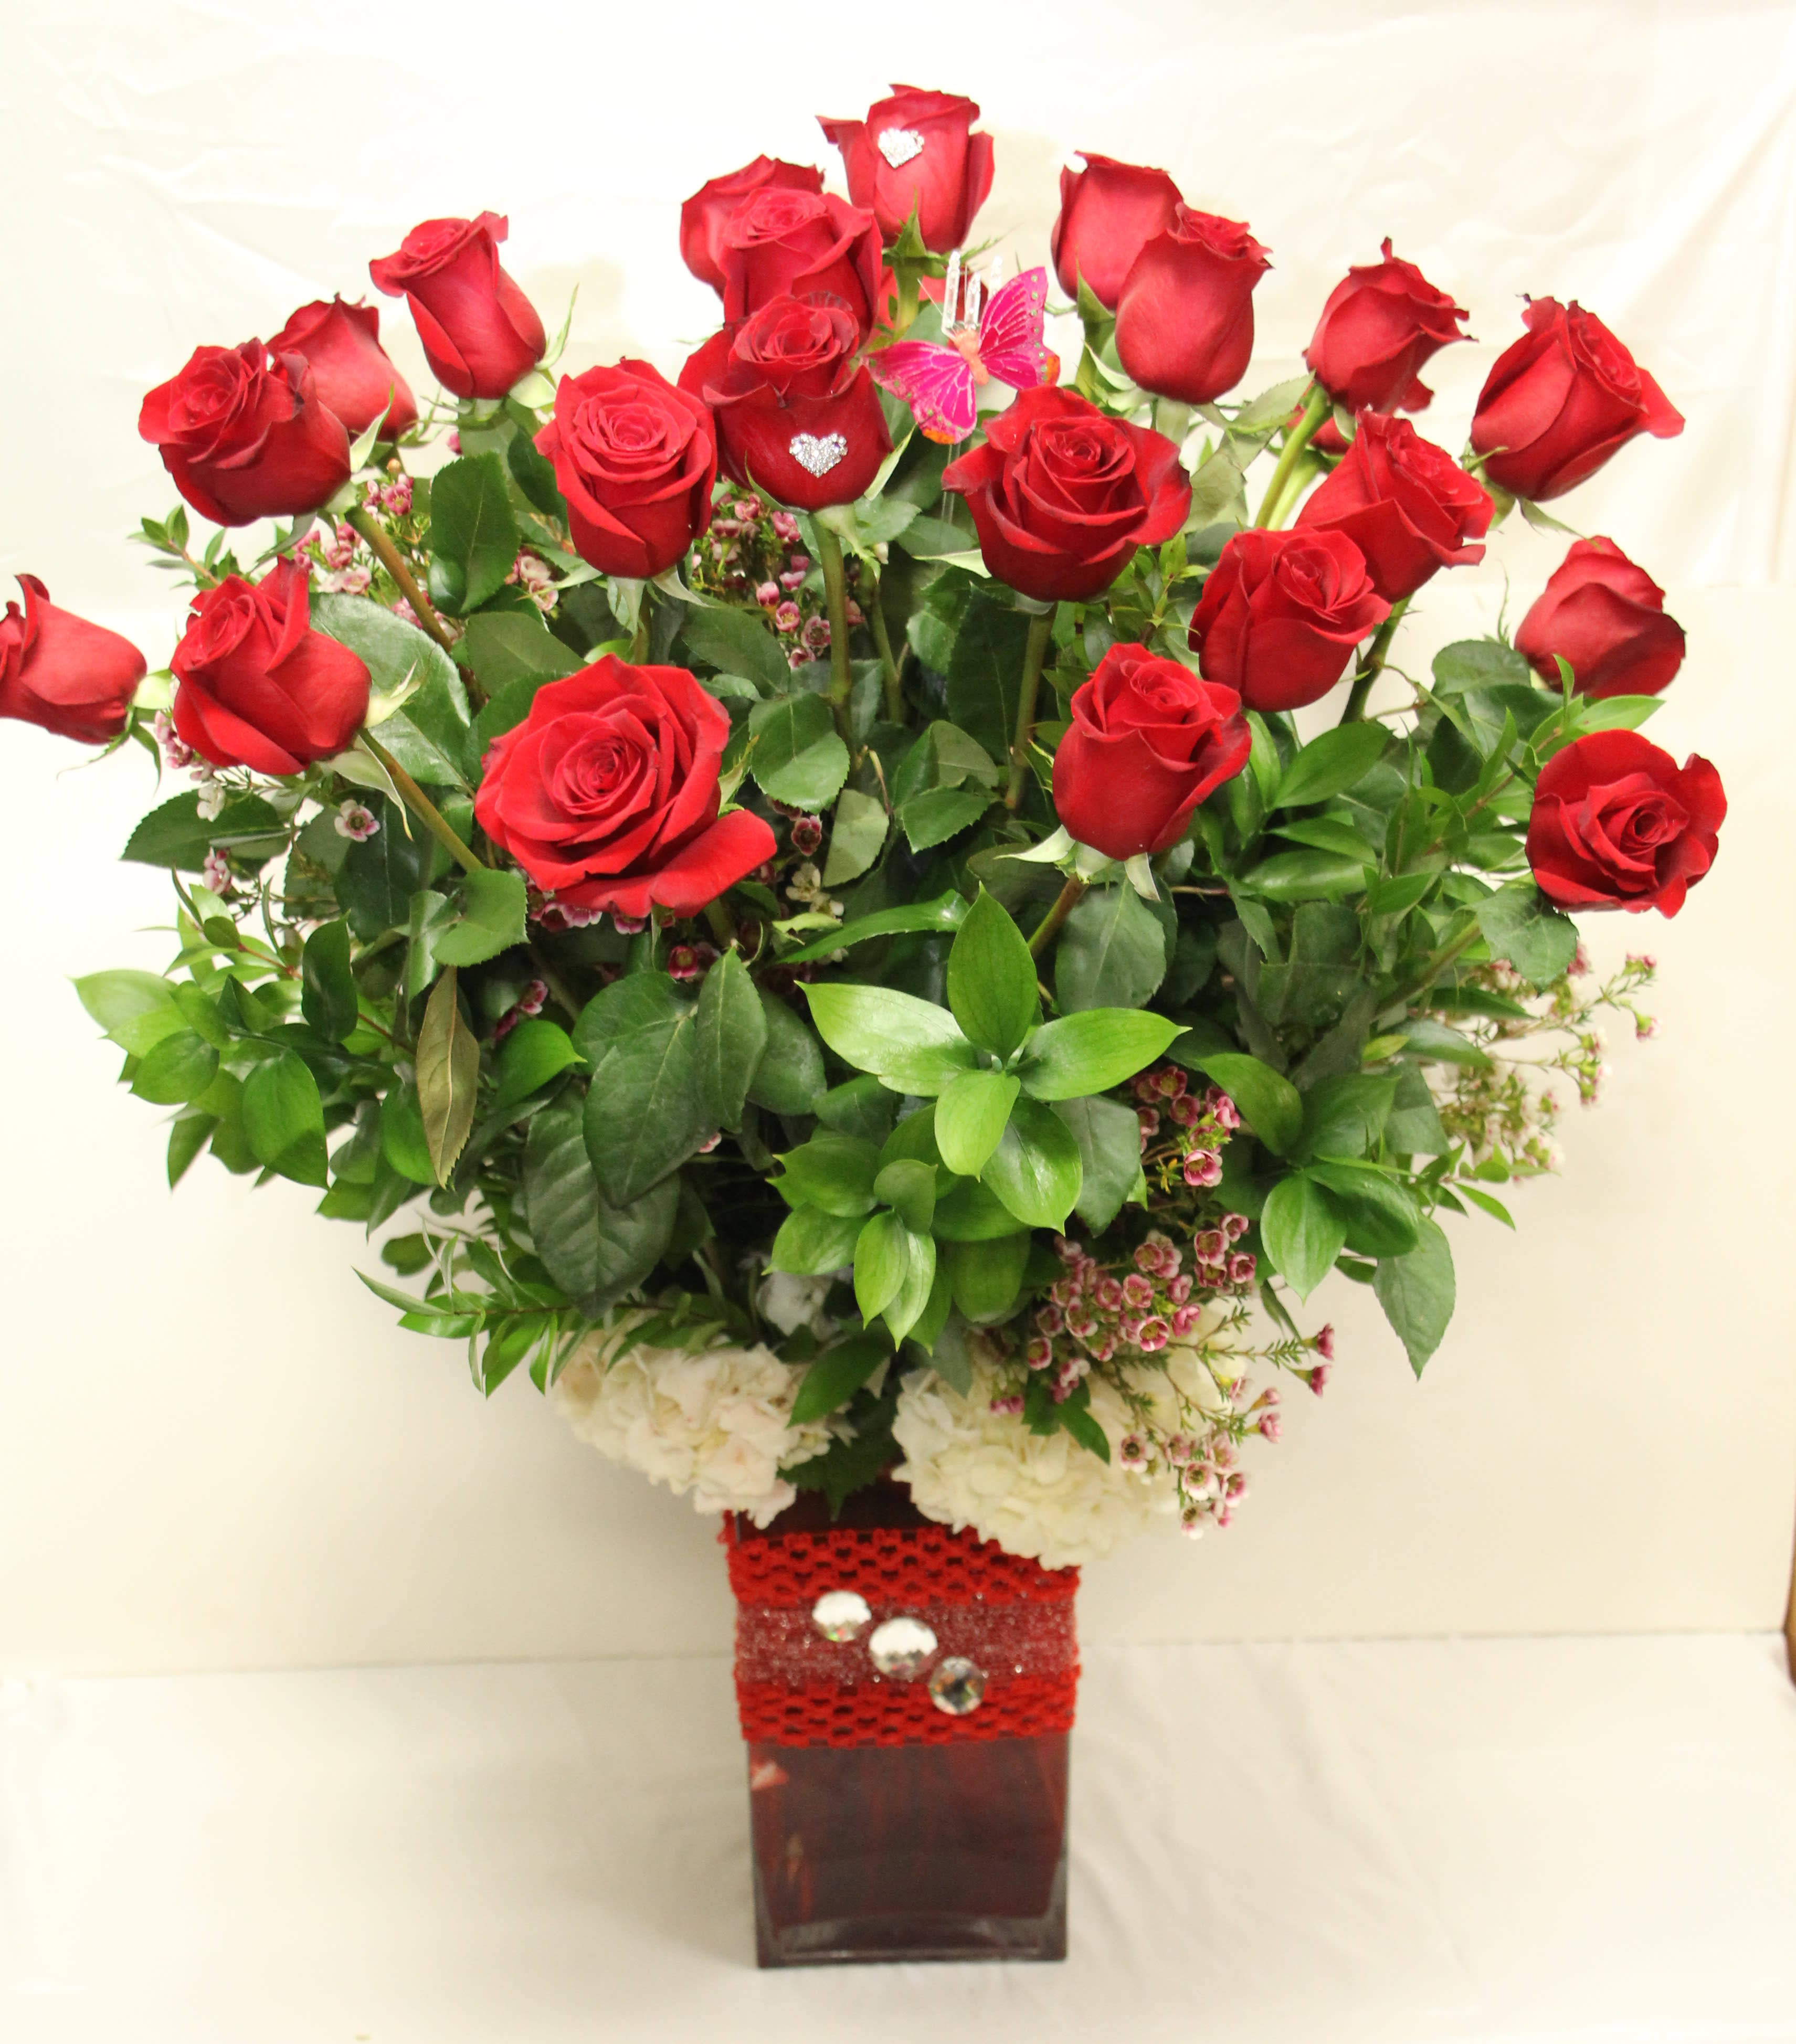 Carolina - Two Dozen Long Stem Red Roses in a Tall Crystal Vase - These outstanding 24 long-stem Ecuadorian red roses are sure to make an impression! Standing tall amongst high quality greens in a tall crystal vase with a base of white Hydrangeas and our signature crystals, the presentation is sure to make a lucky recipient really happy!